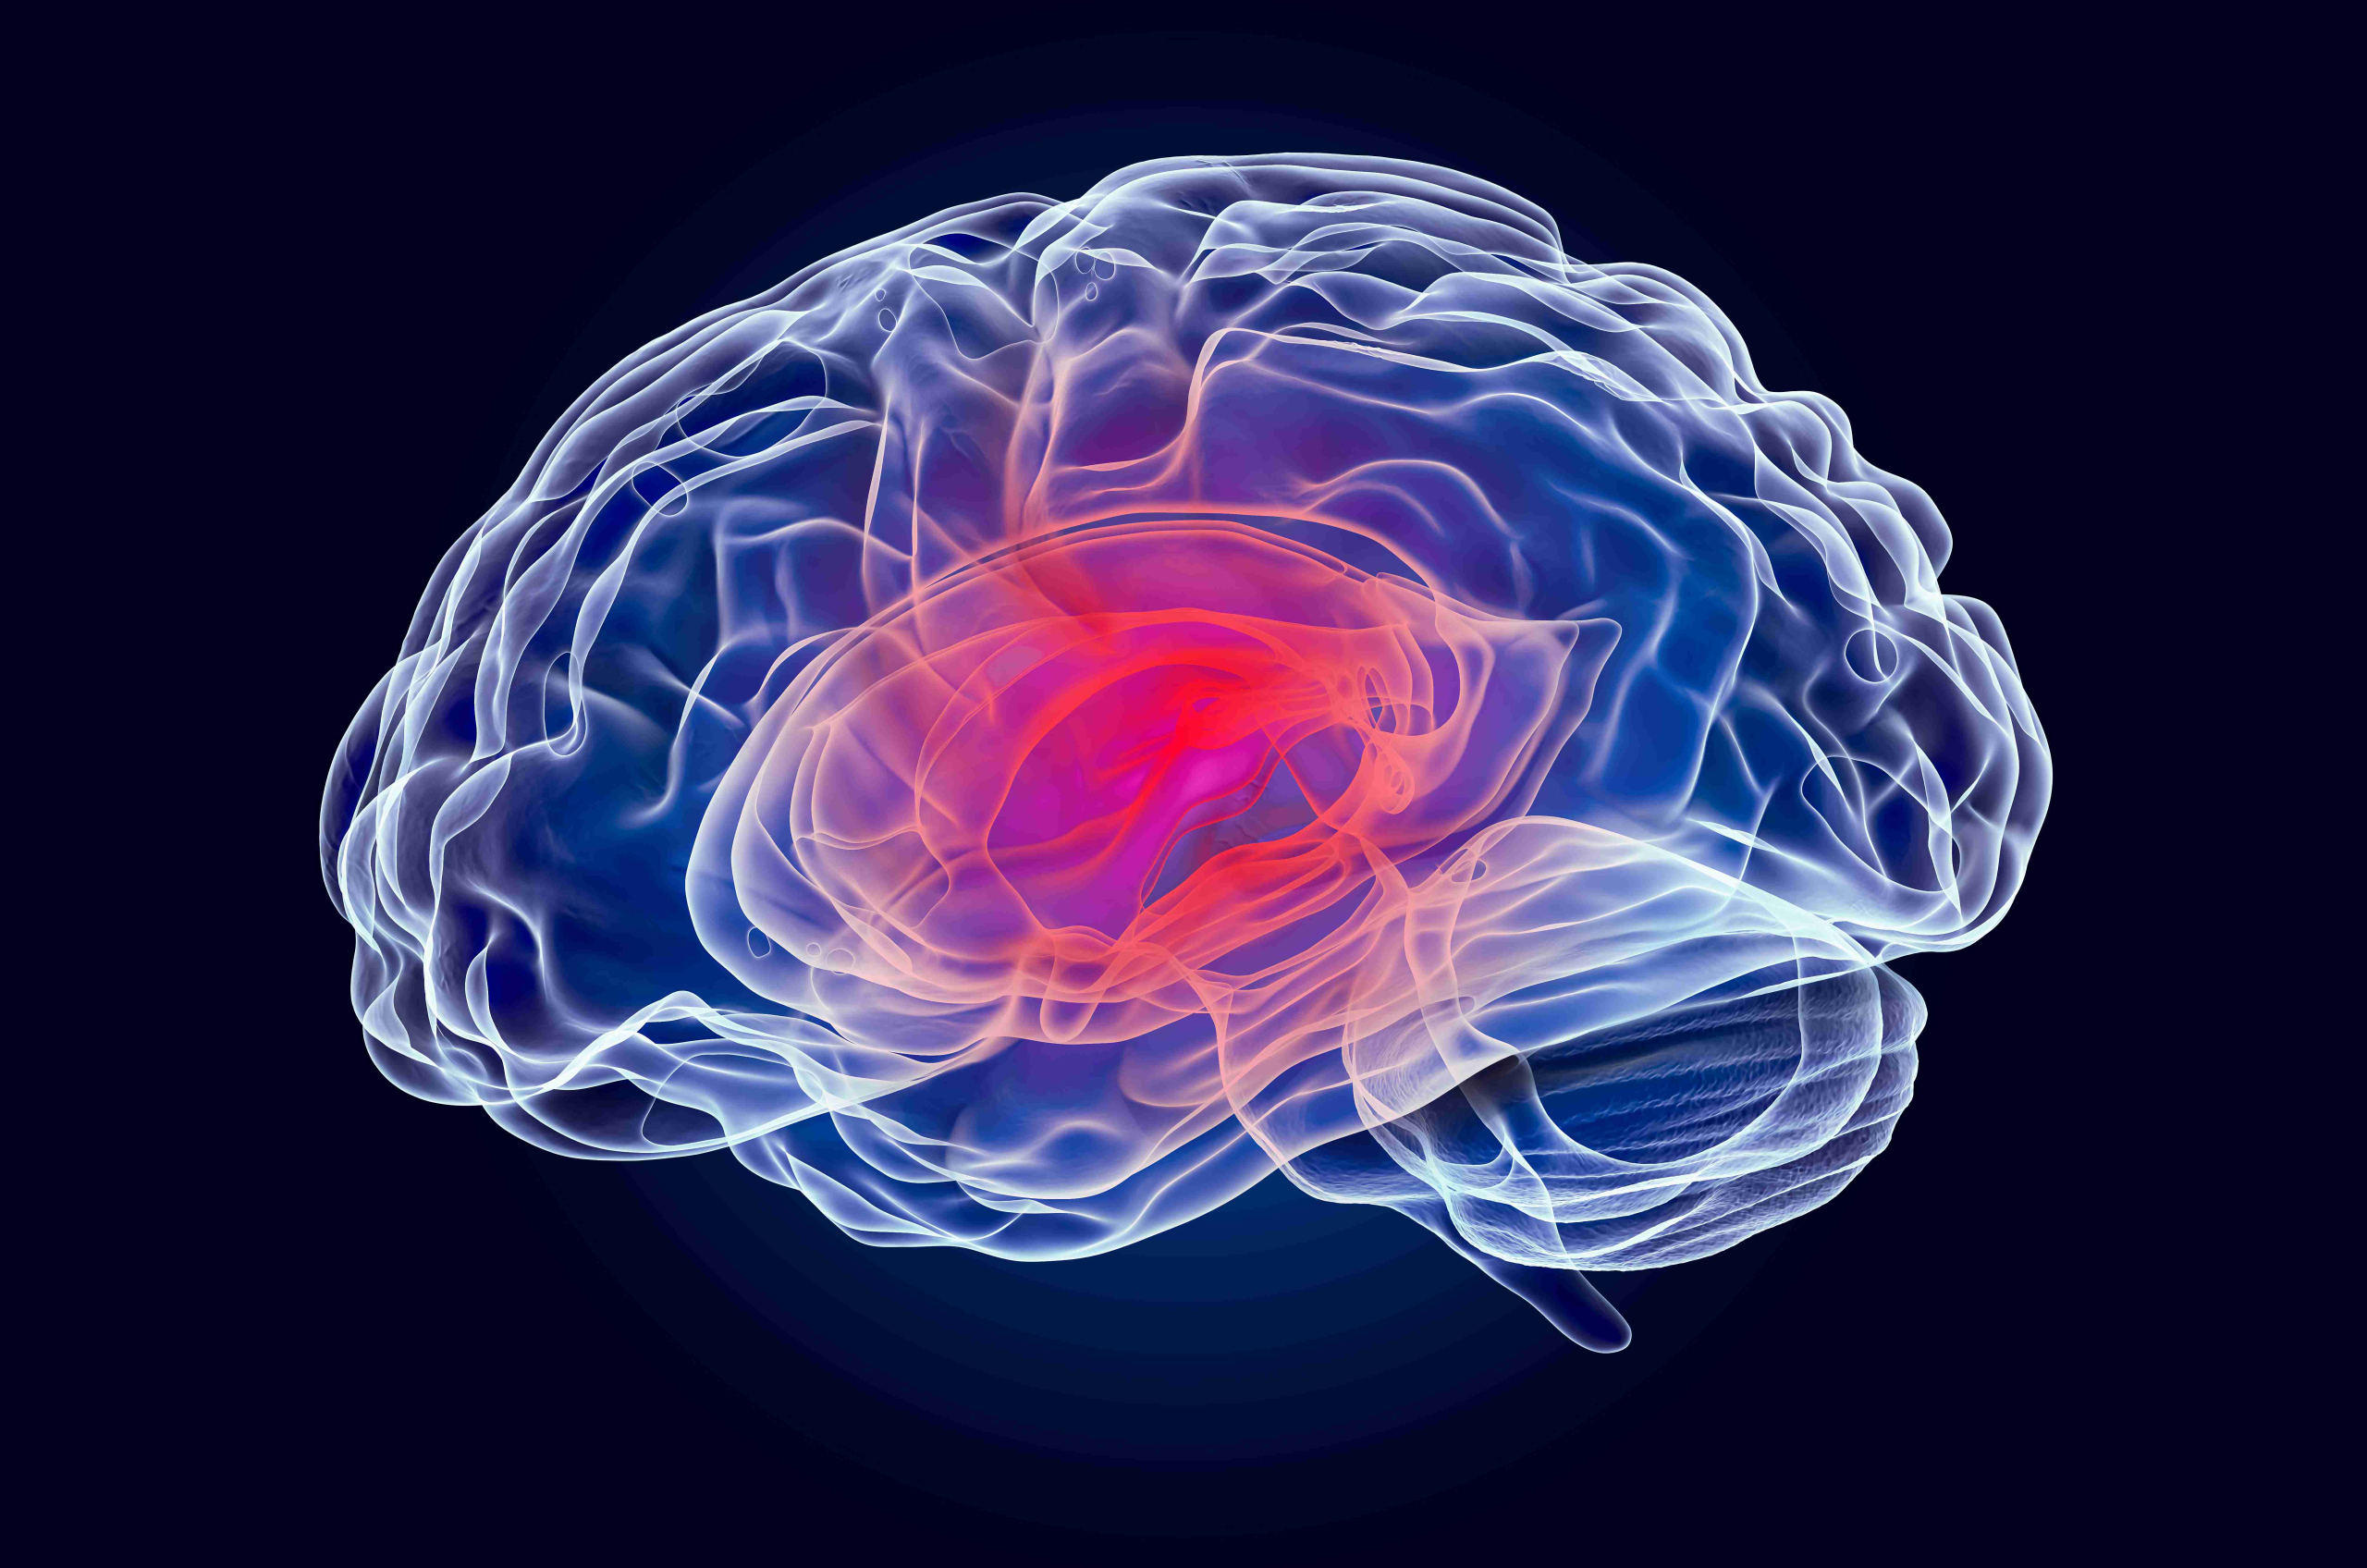 A render of a brain that is glowing red in the centre.